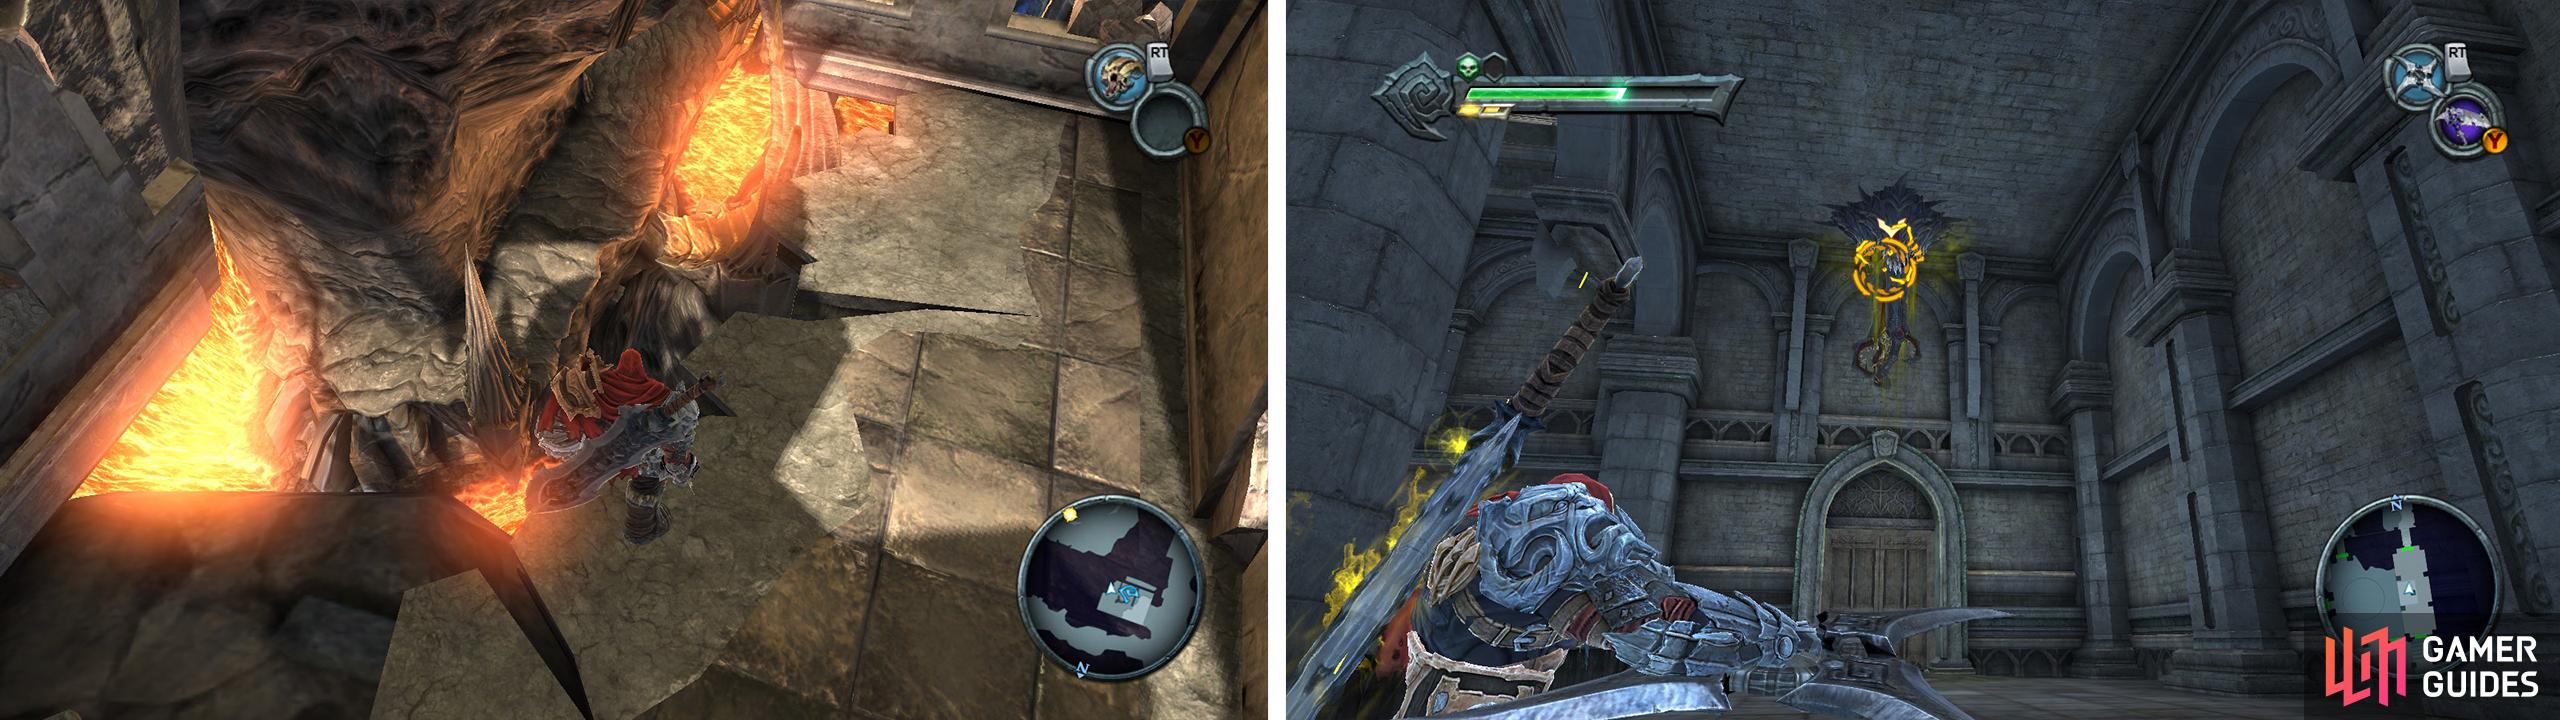 Scalding Gallow: Look for the hidden path below Samael’s Prison from the Vulgrim Location (left). Twilight Cathedral: Before fighting the boss climb up the block again and stun the Demon Plant (right) the armour is inside the door its guarding.